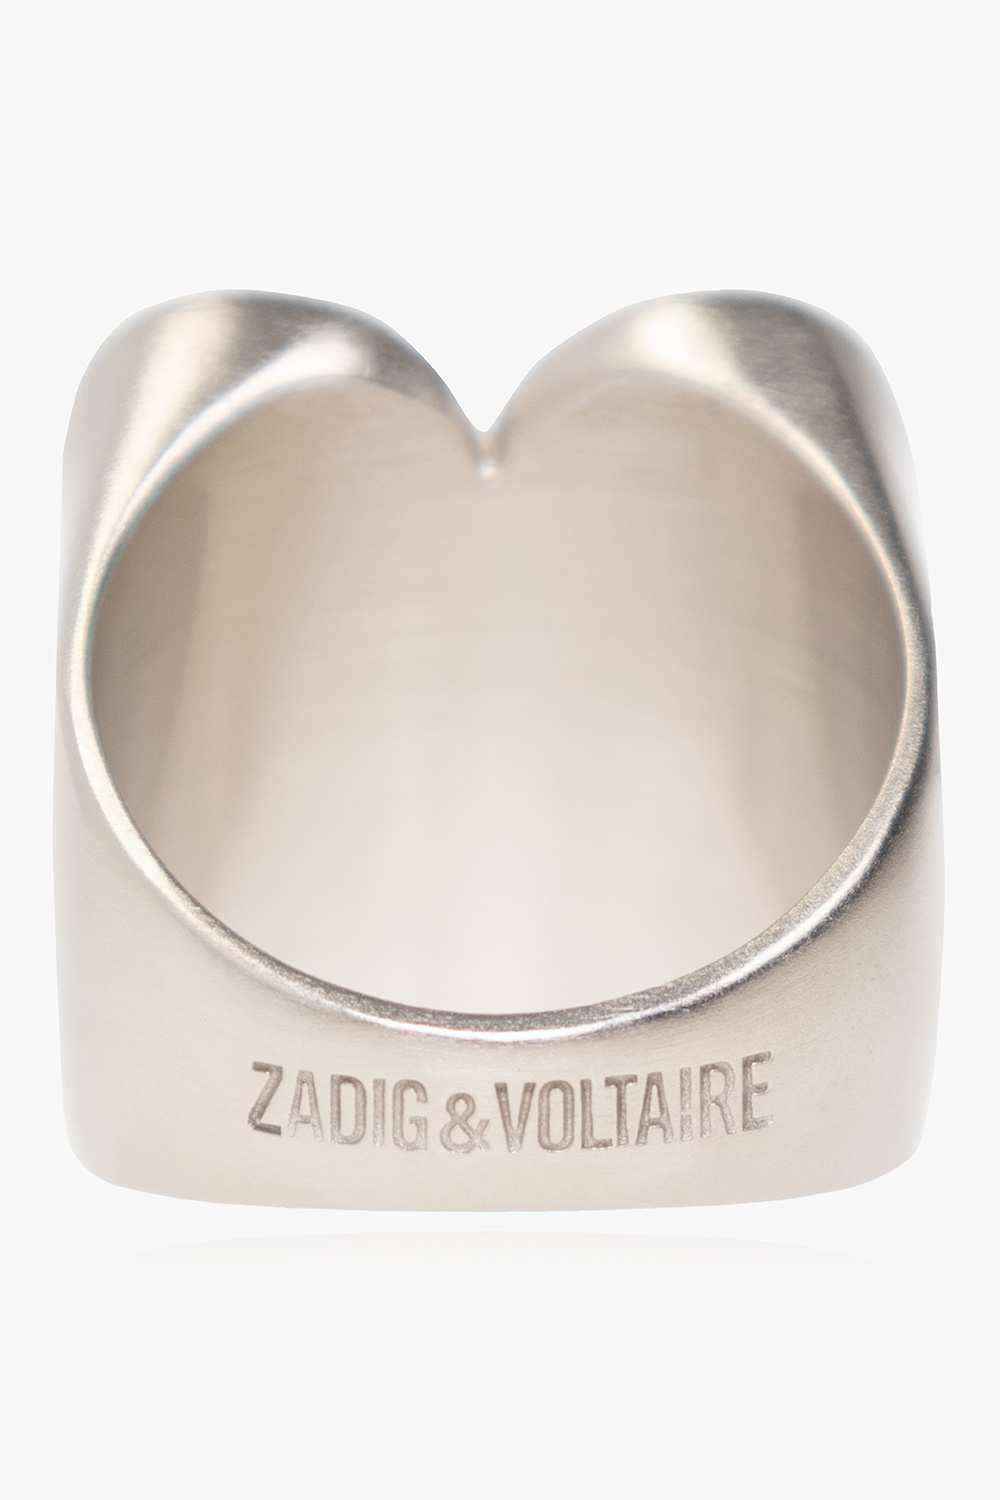 Zadig & Voltaire ‘Idol’ ring